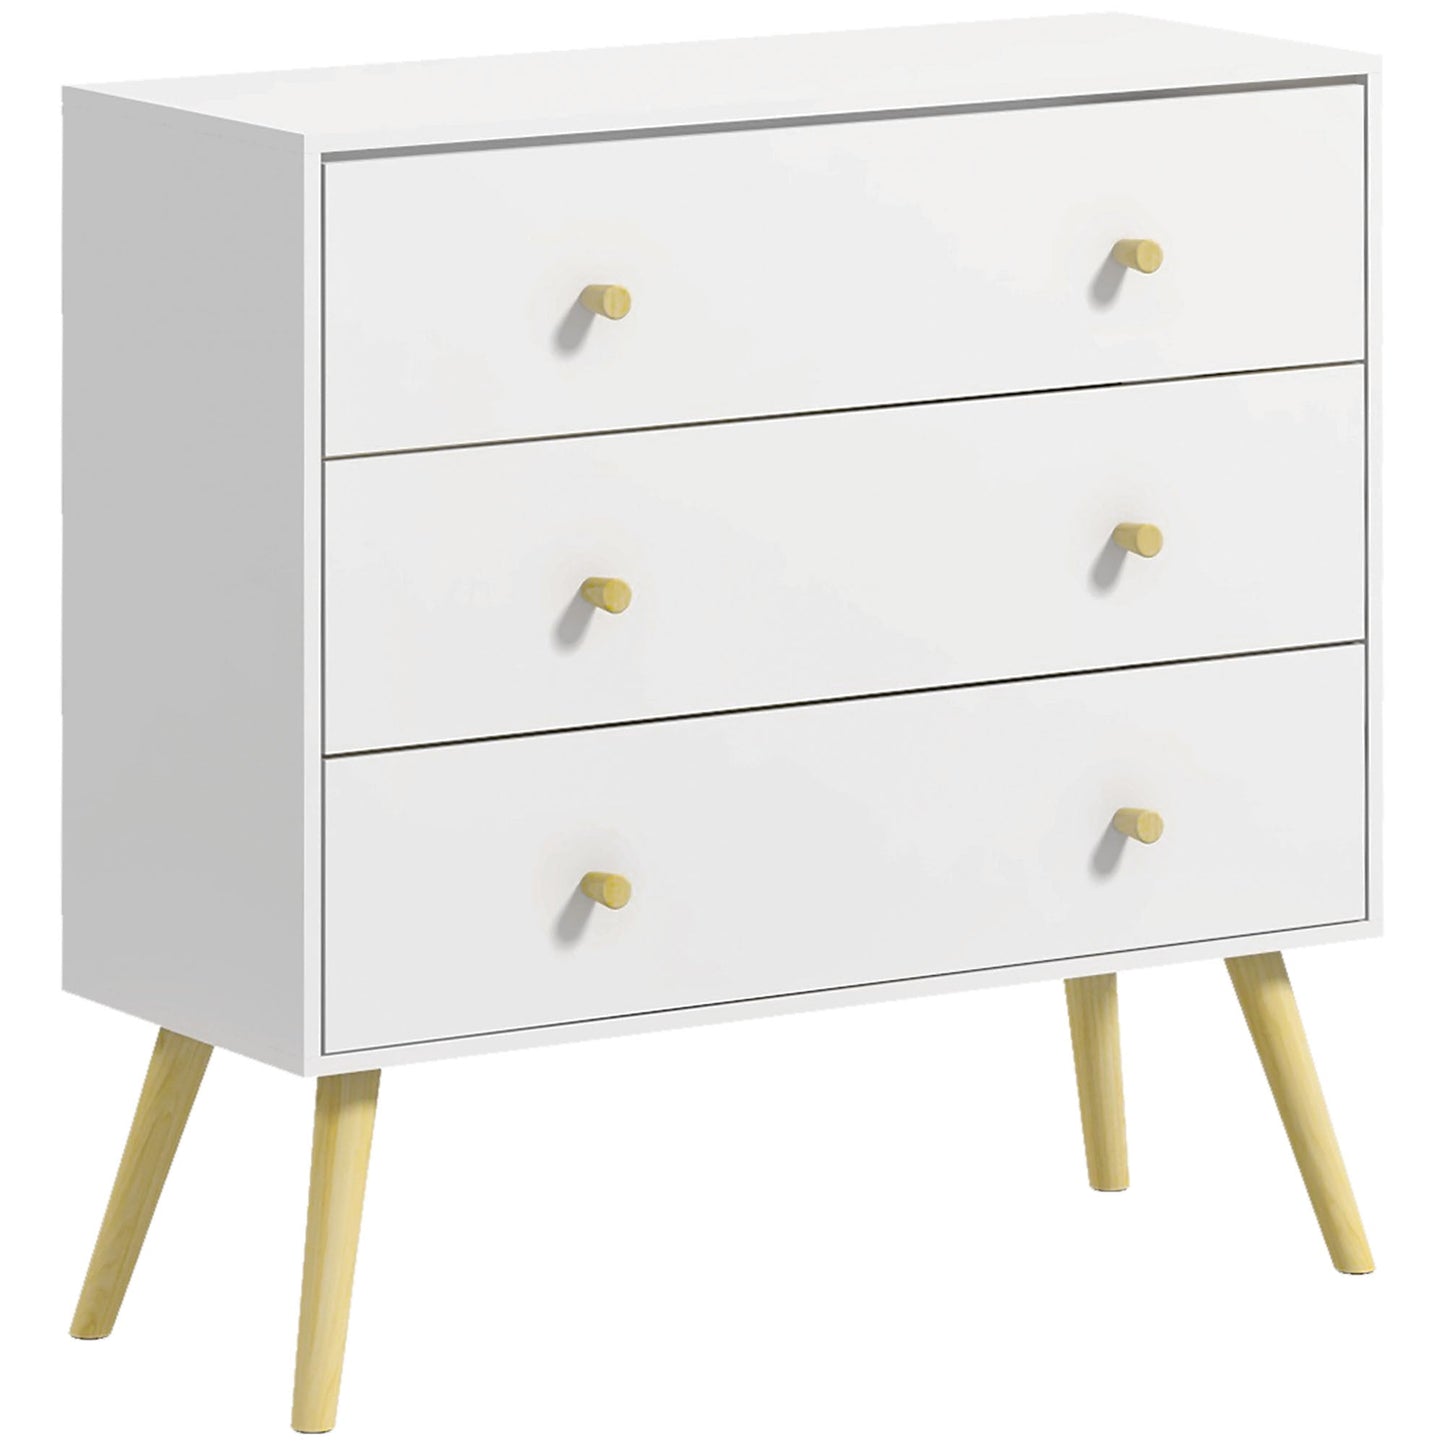 Chest of Drawers, 3-Drawer Storage Organiser Unit with Wood Legs for Bedroom, Living Room, White